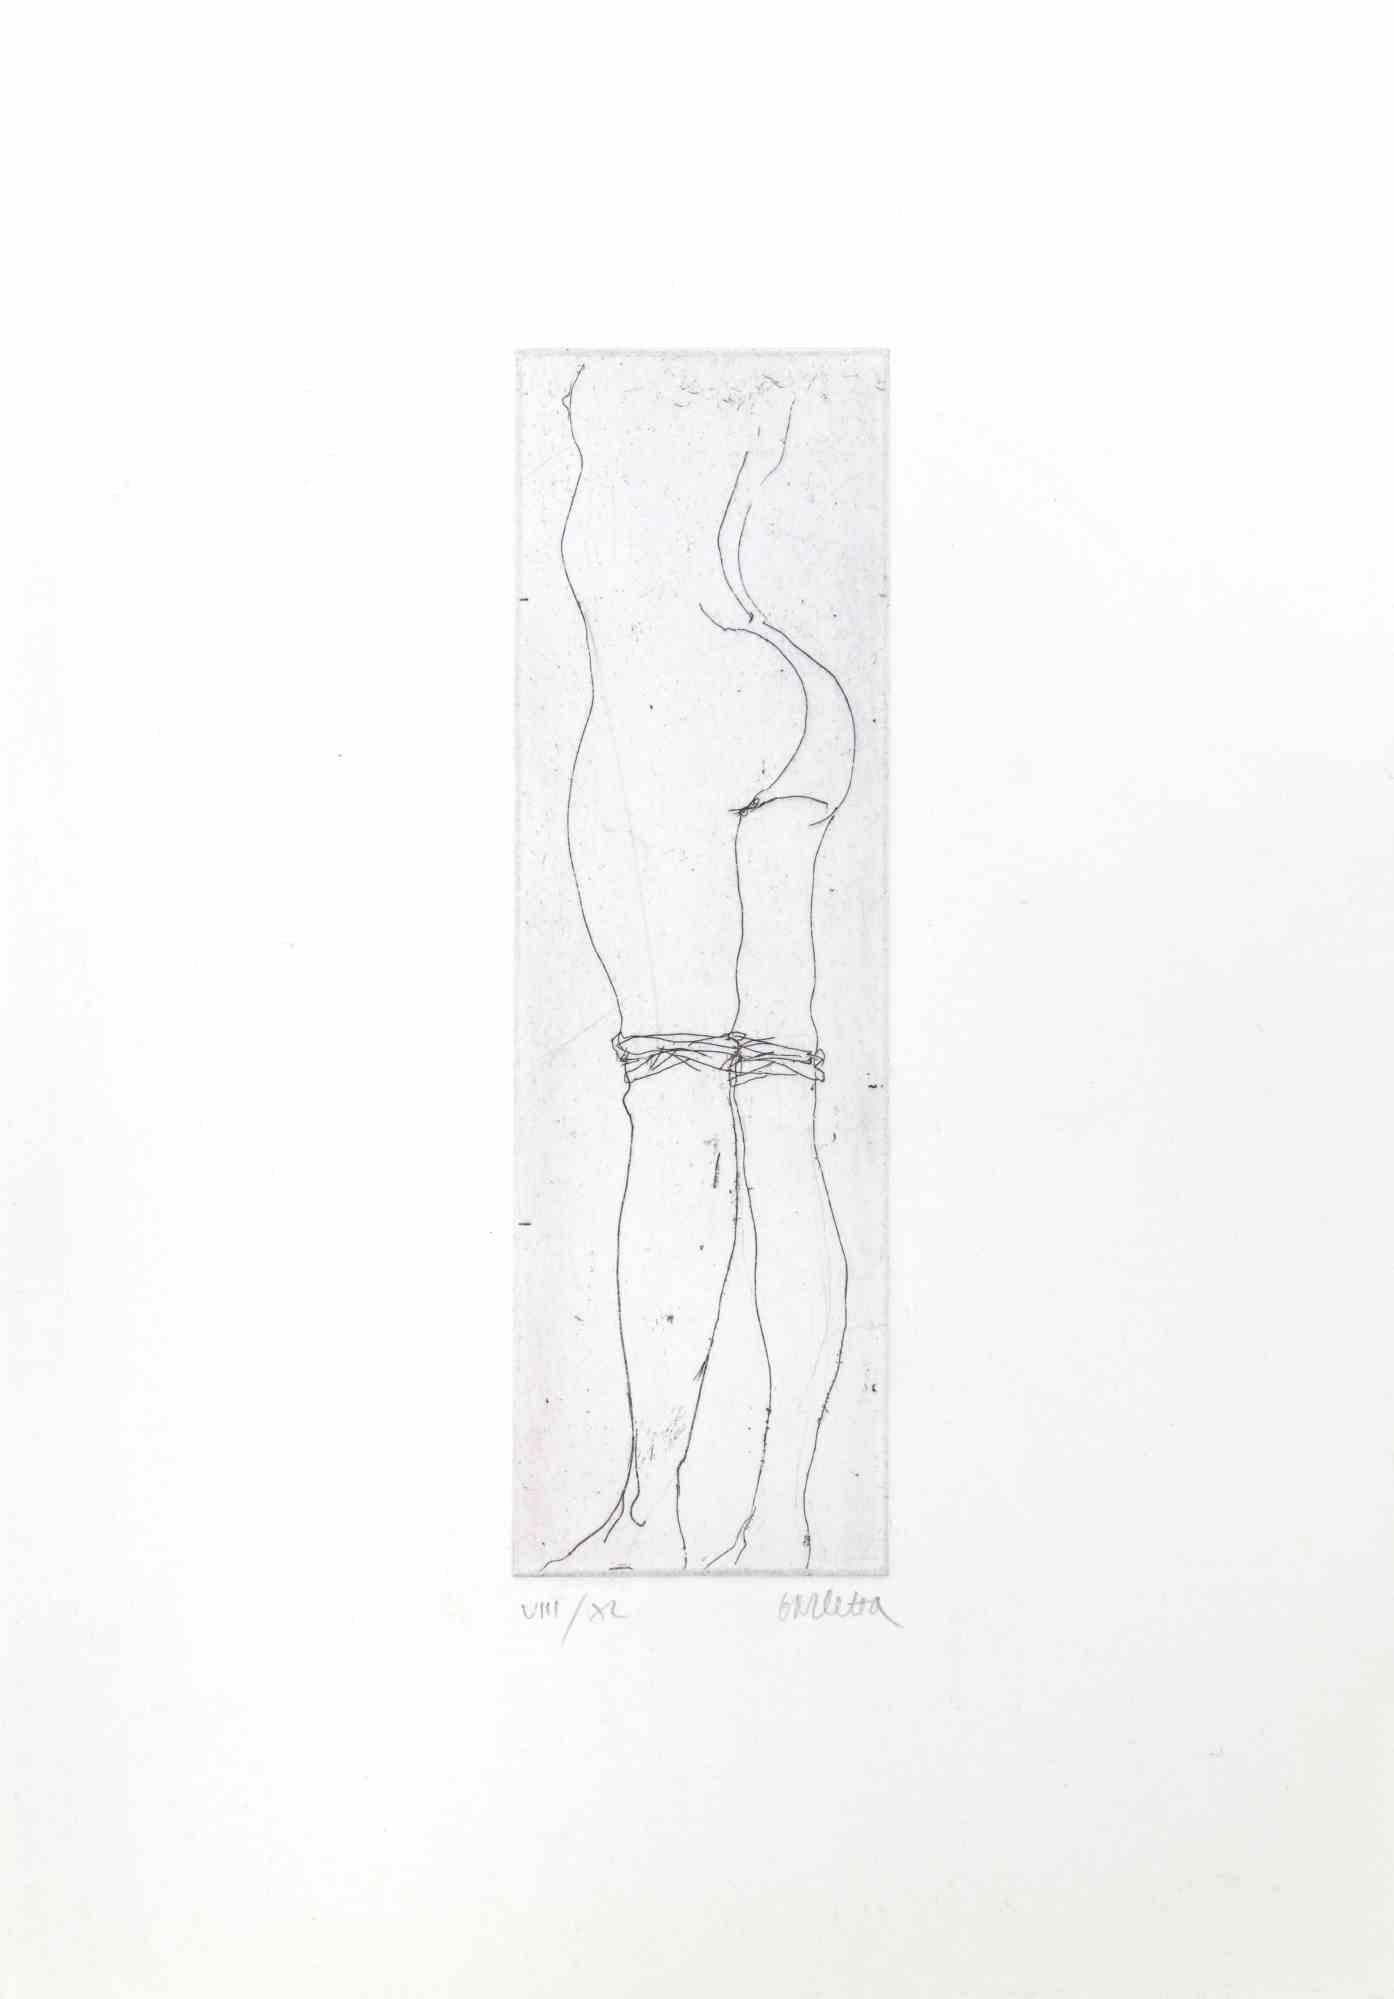 Nude  is a Hand-colored etching artwork, realized in 1974 by  Sergio Barletta.

Hand-signed on the lower right in pencil. numbered in Roman numerals on the lower left, from the edition of XL prints.

In very good conditions.

The artwork represents